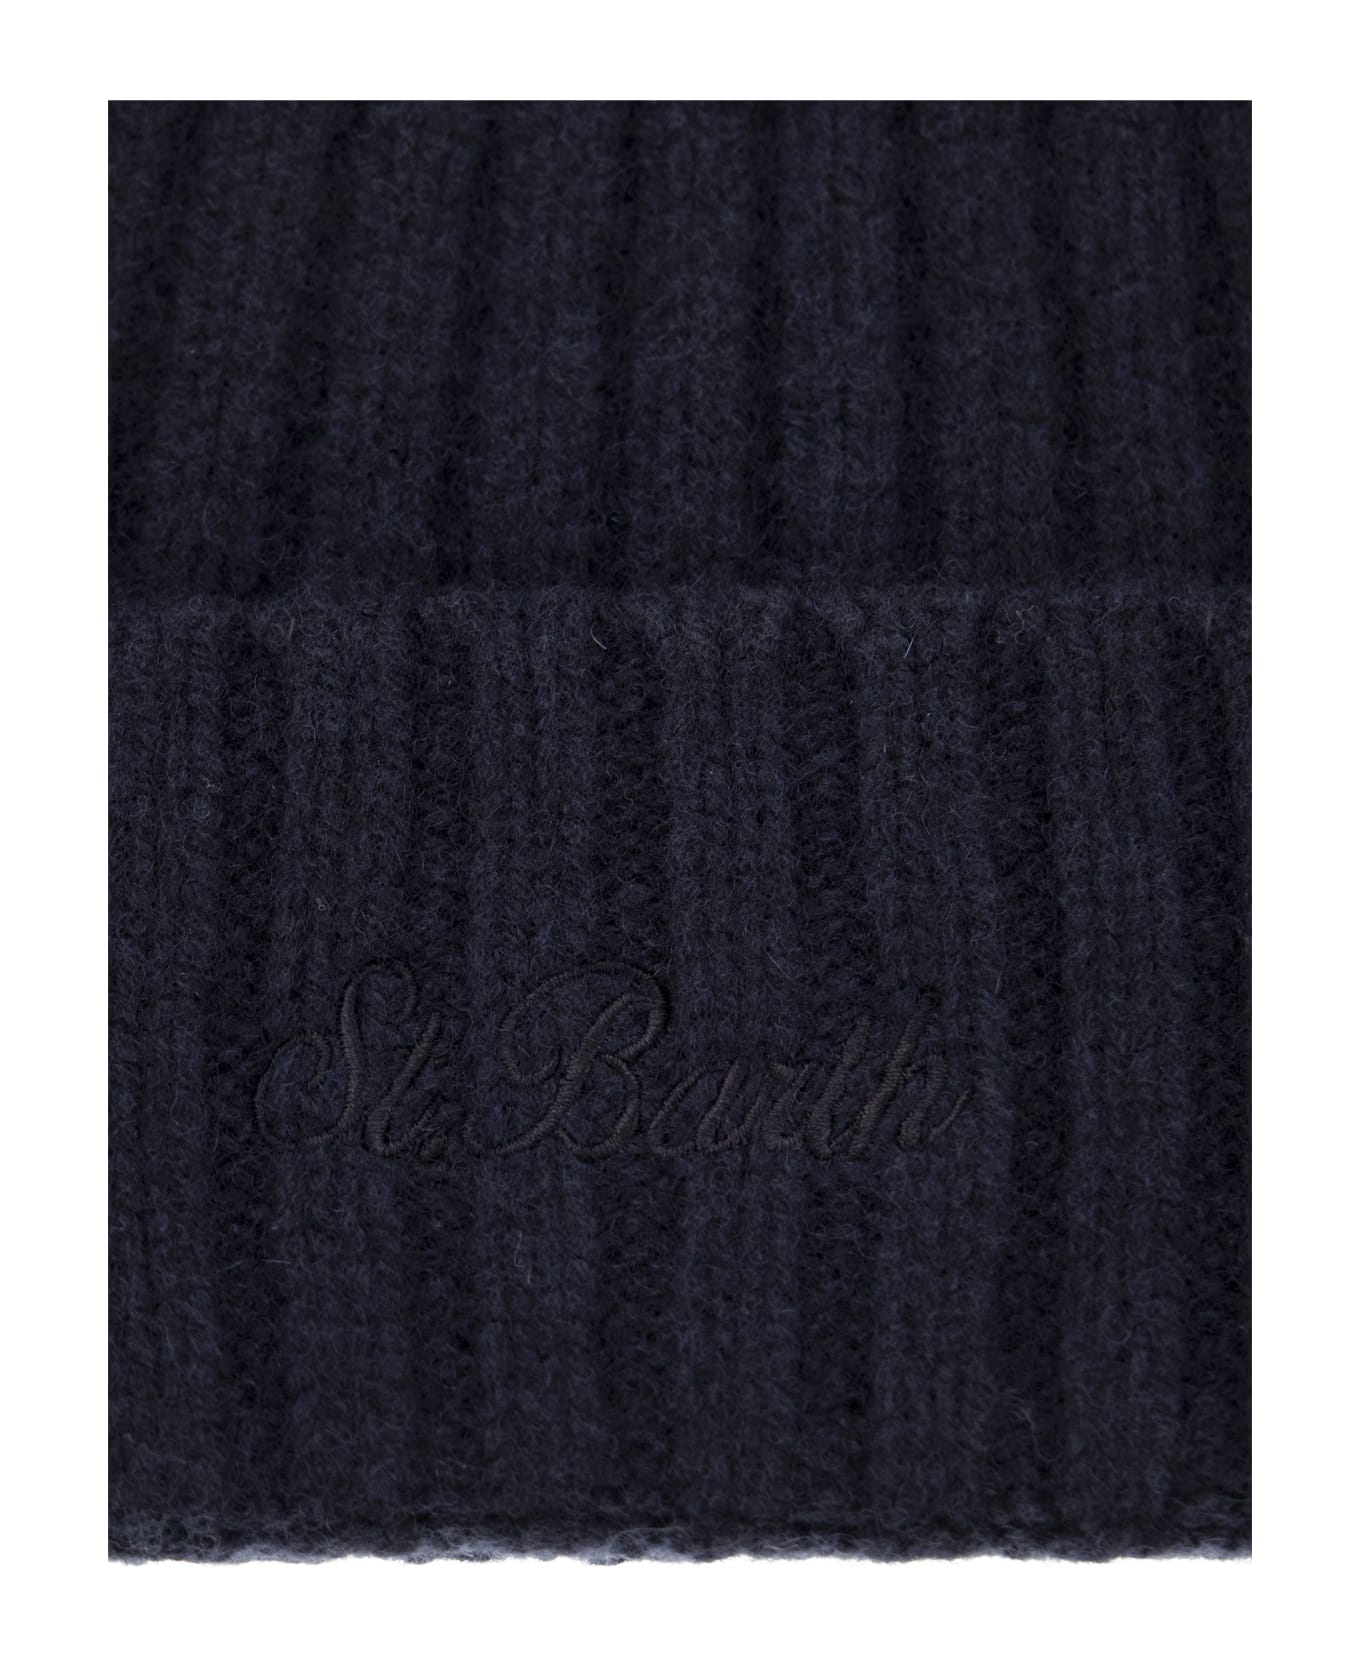 MC2 Saint Barth Wool Hat With Embroidery - Blue